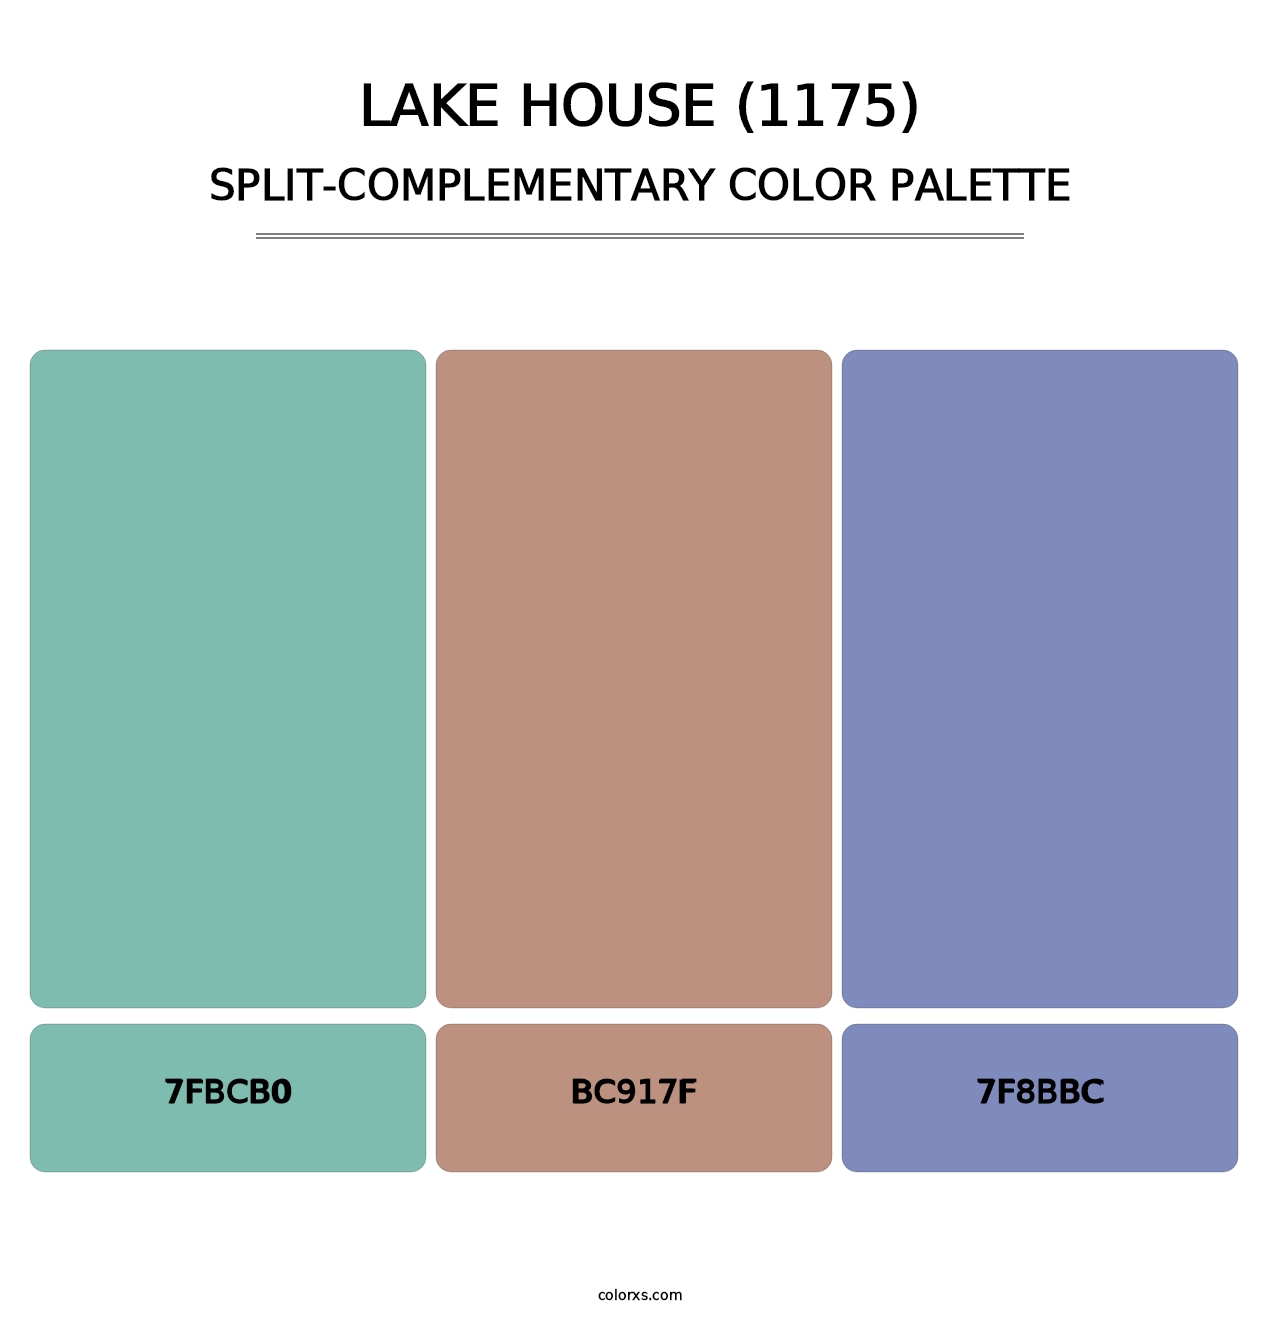 Lake House (1175) - Split-Complementary Color Palette